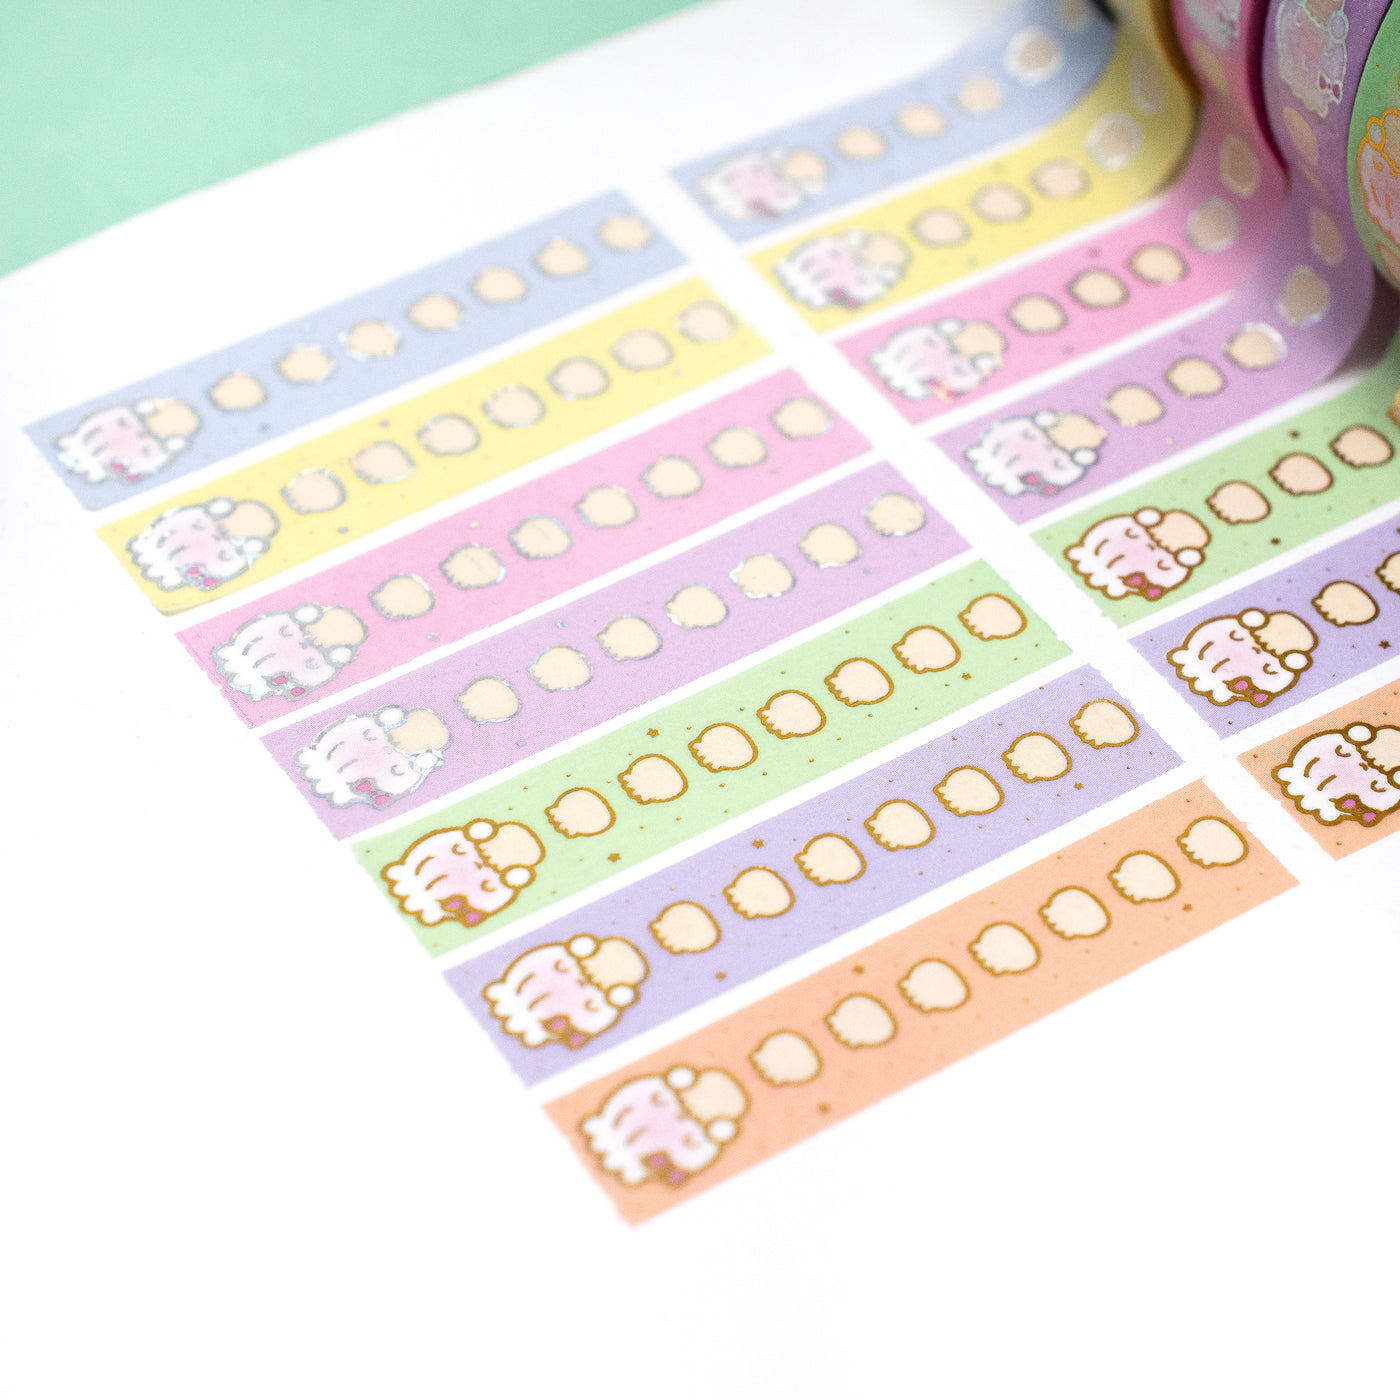 Spring Functional Checklists Washi (Set Of 7)